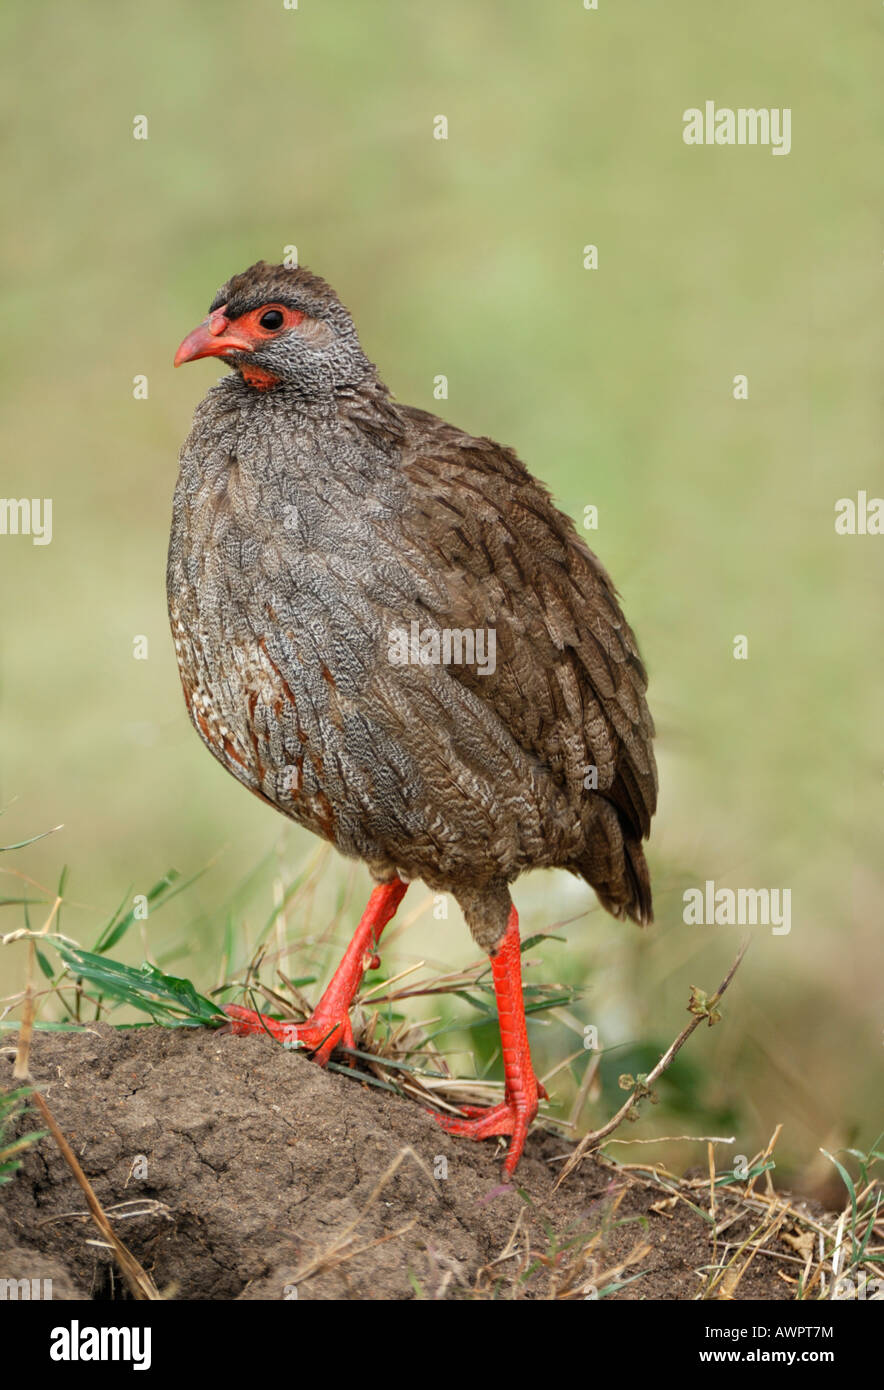 Red-necked Francolin or Red-necked Spurfowl (Francolinus afer), Masai Mara, Kenya, Africa Stock Photo